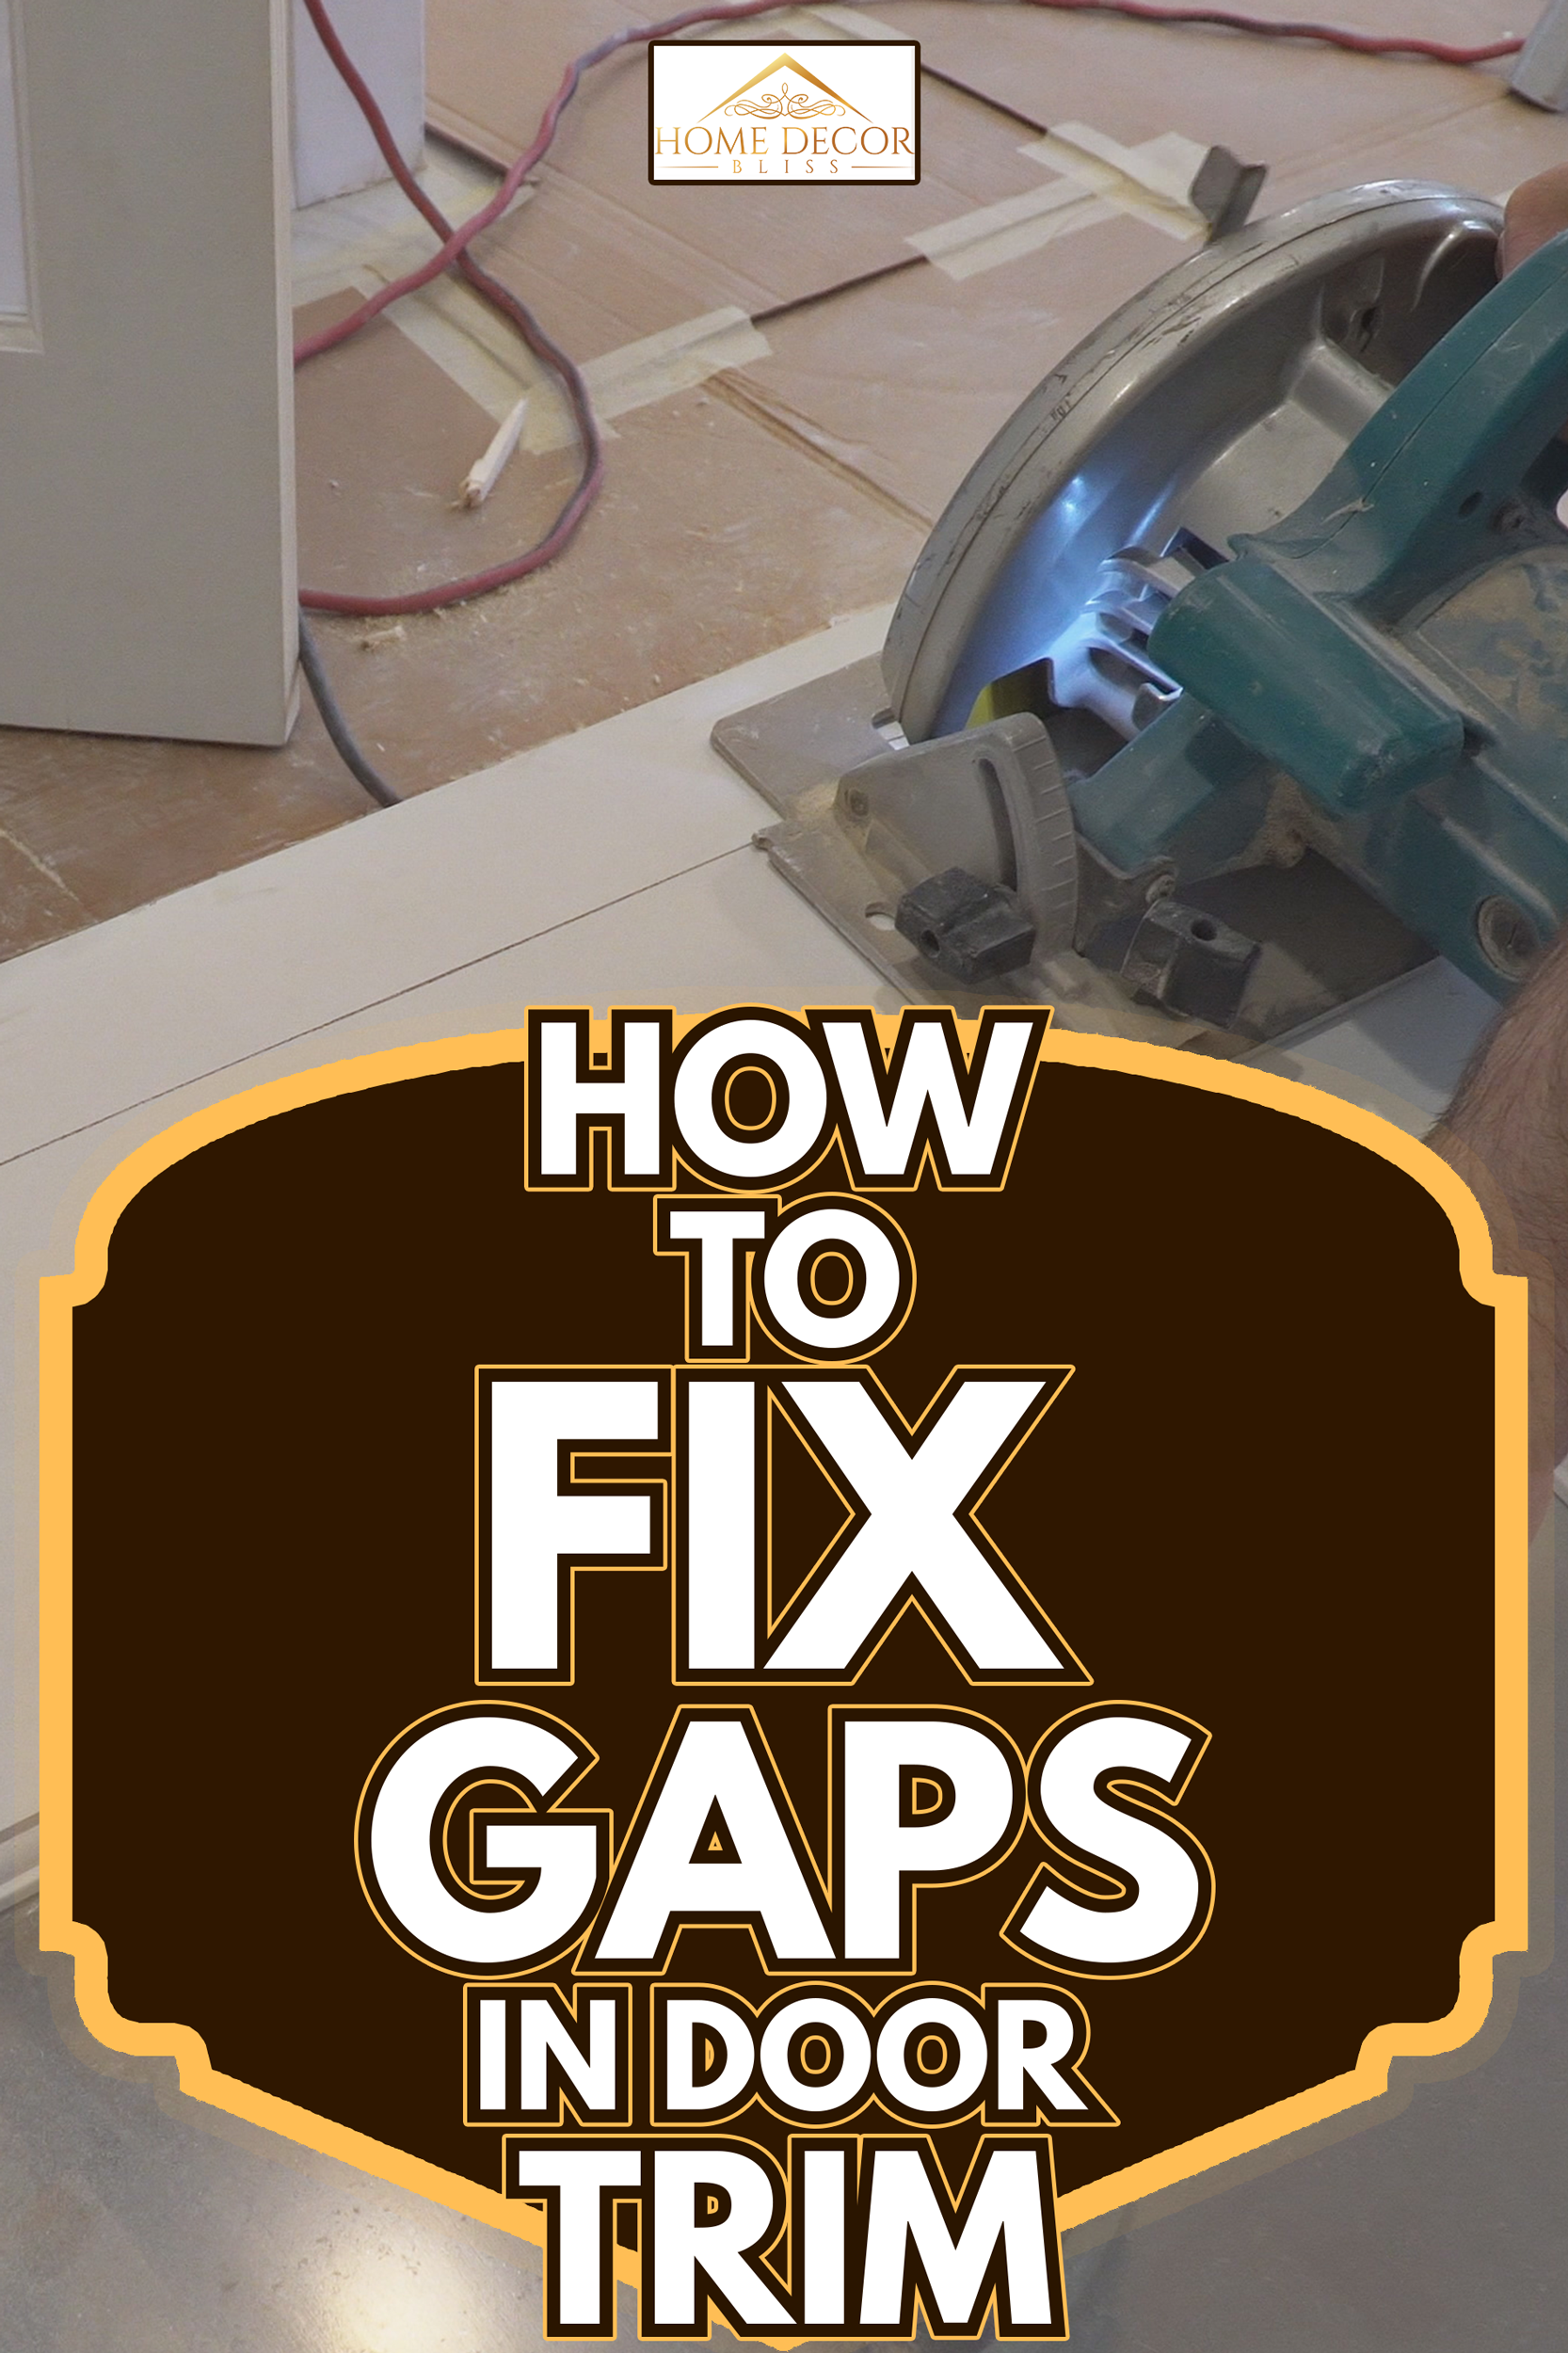 man using a circular saw for cutting wood door construction and home renovation, repair tools - How To Fix Gaps In Door Trim